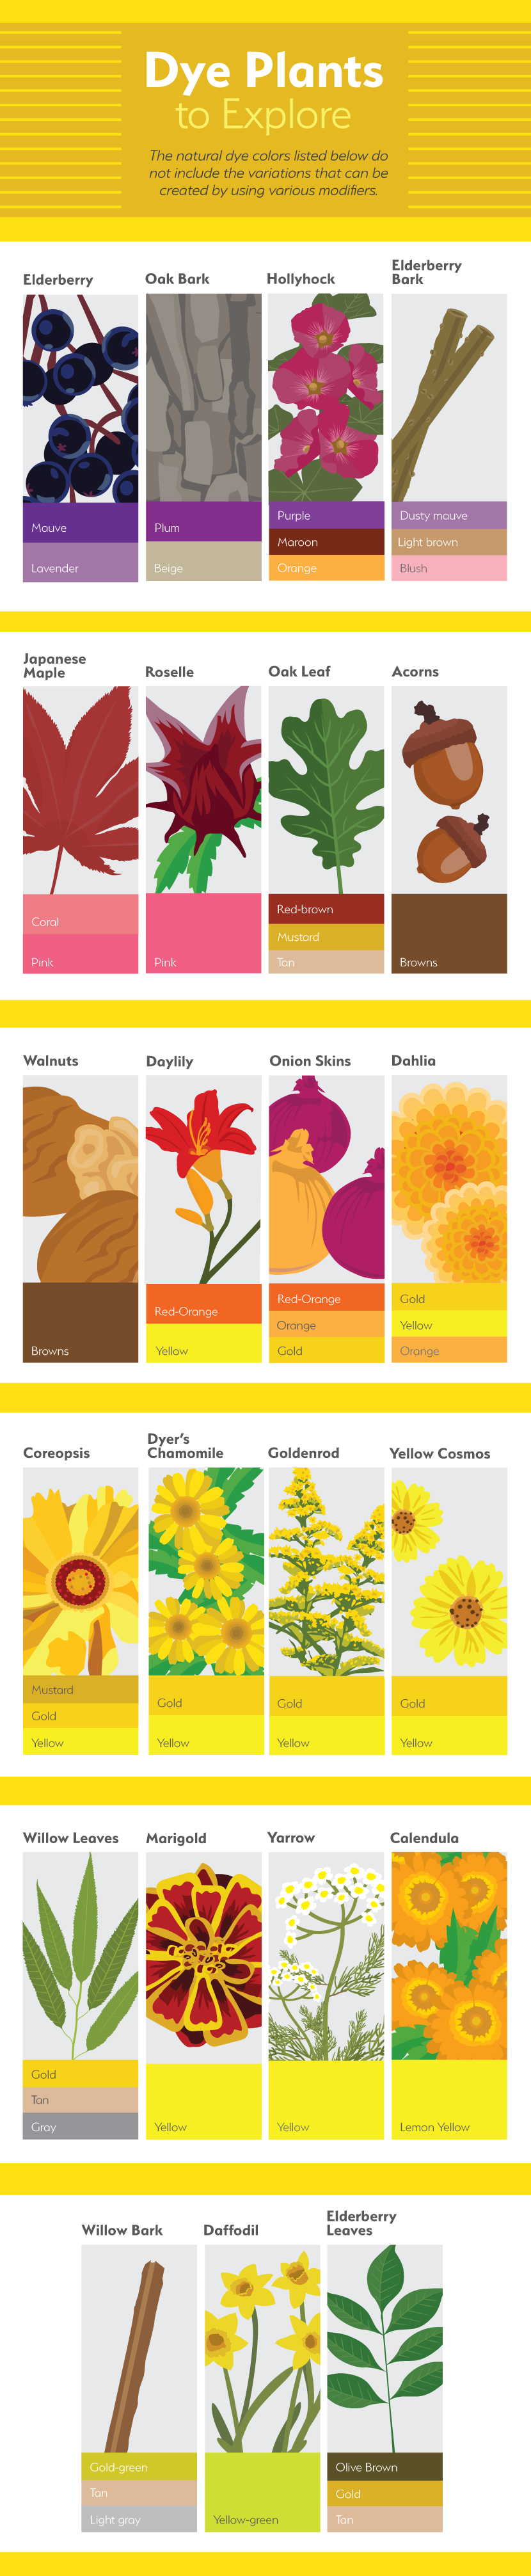 Dye Plants to Explore - Natural Dyes from Your Flower Garden